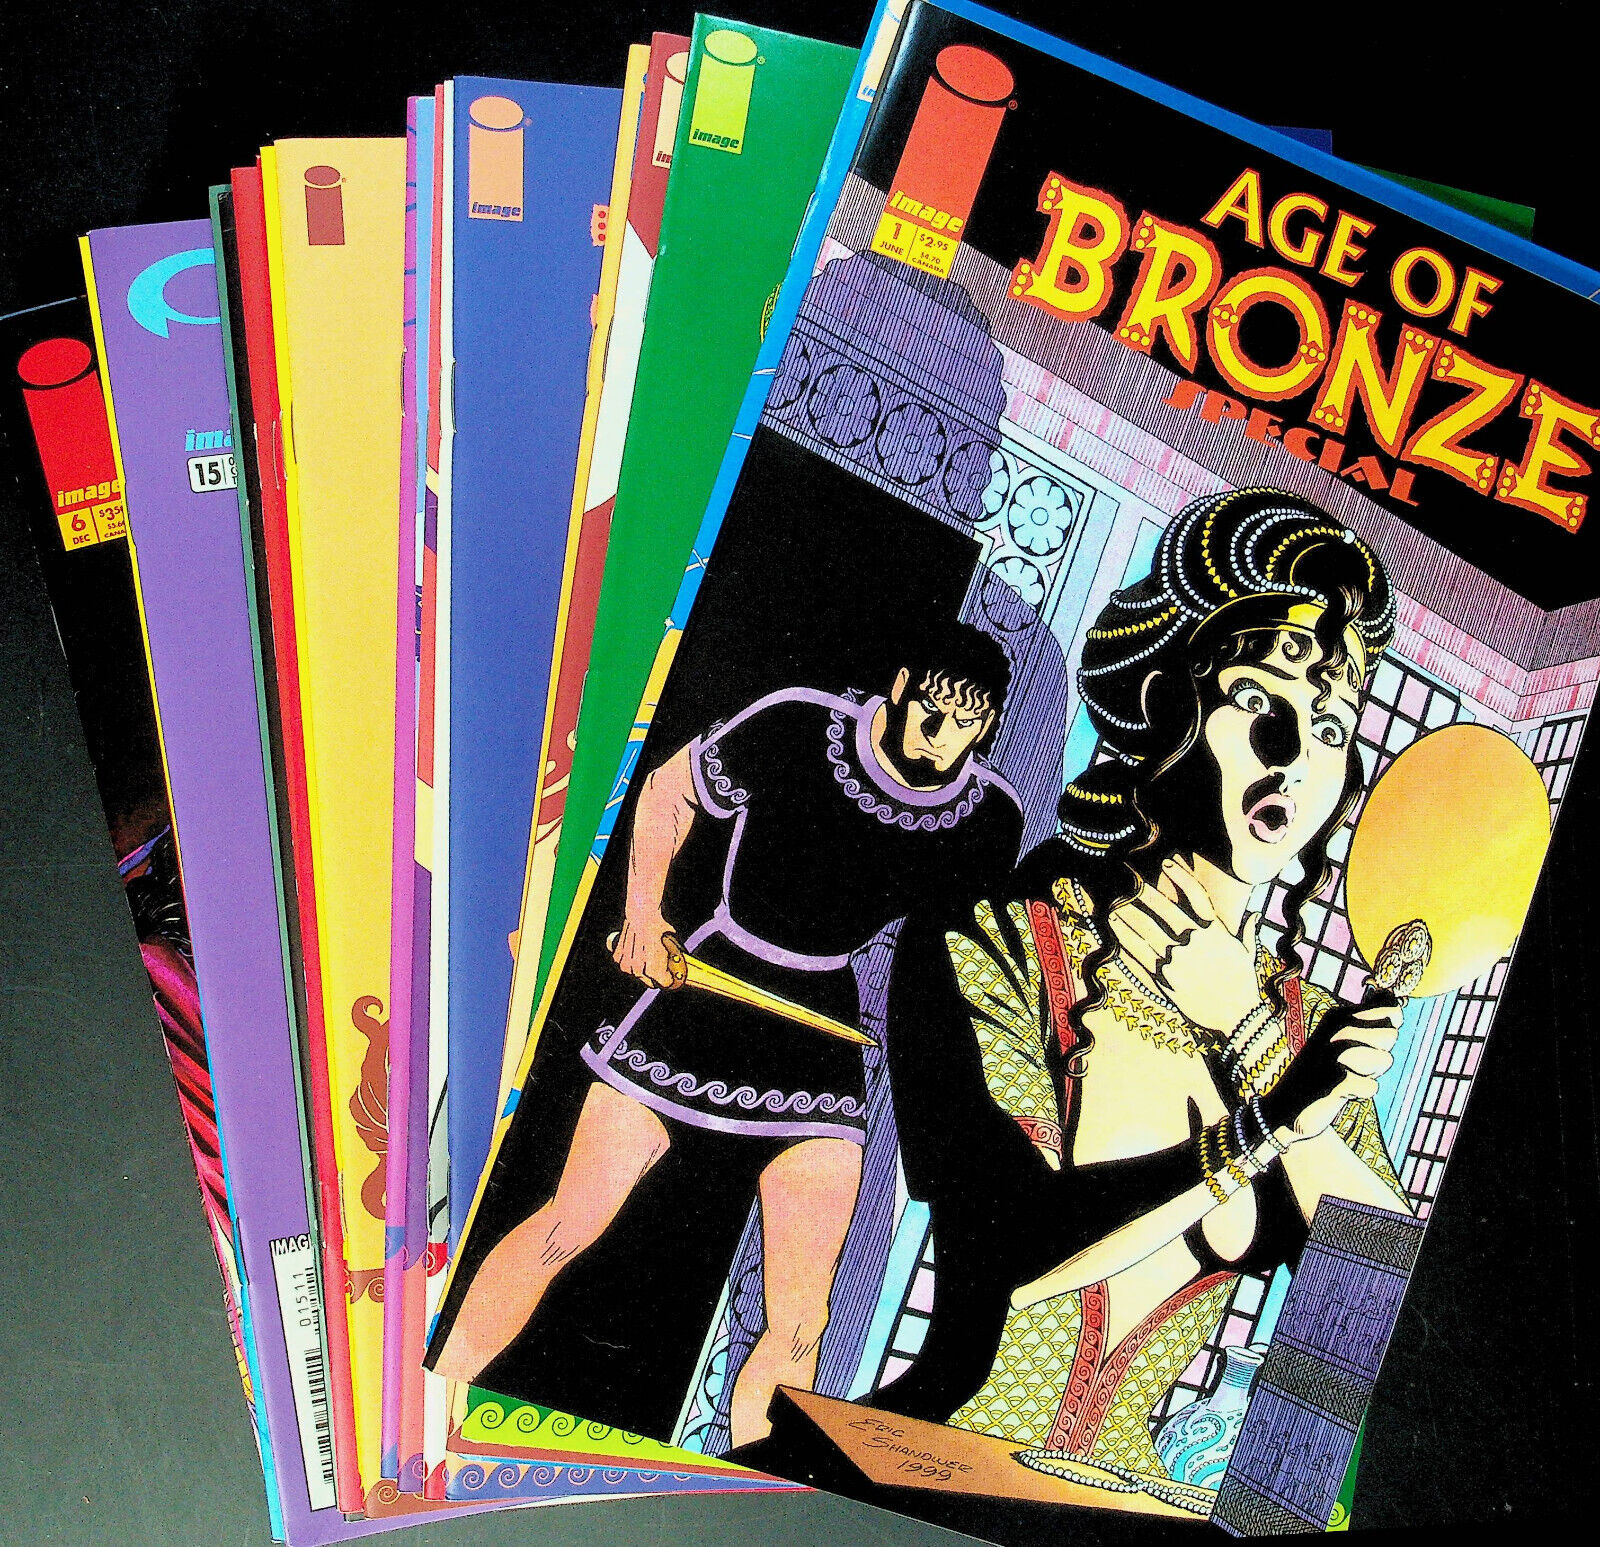 Age of Bronze - 31 issue lot (near complete) #1 - 26, 28-31, Special,High Grades